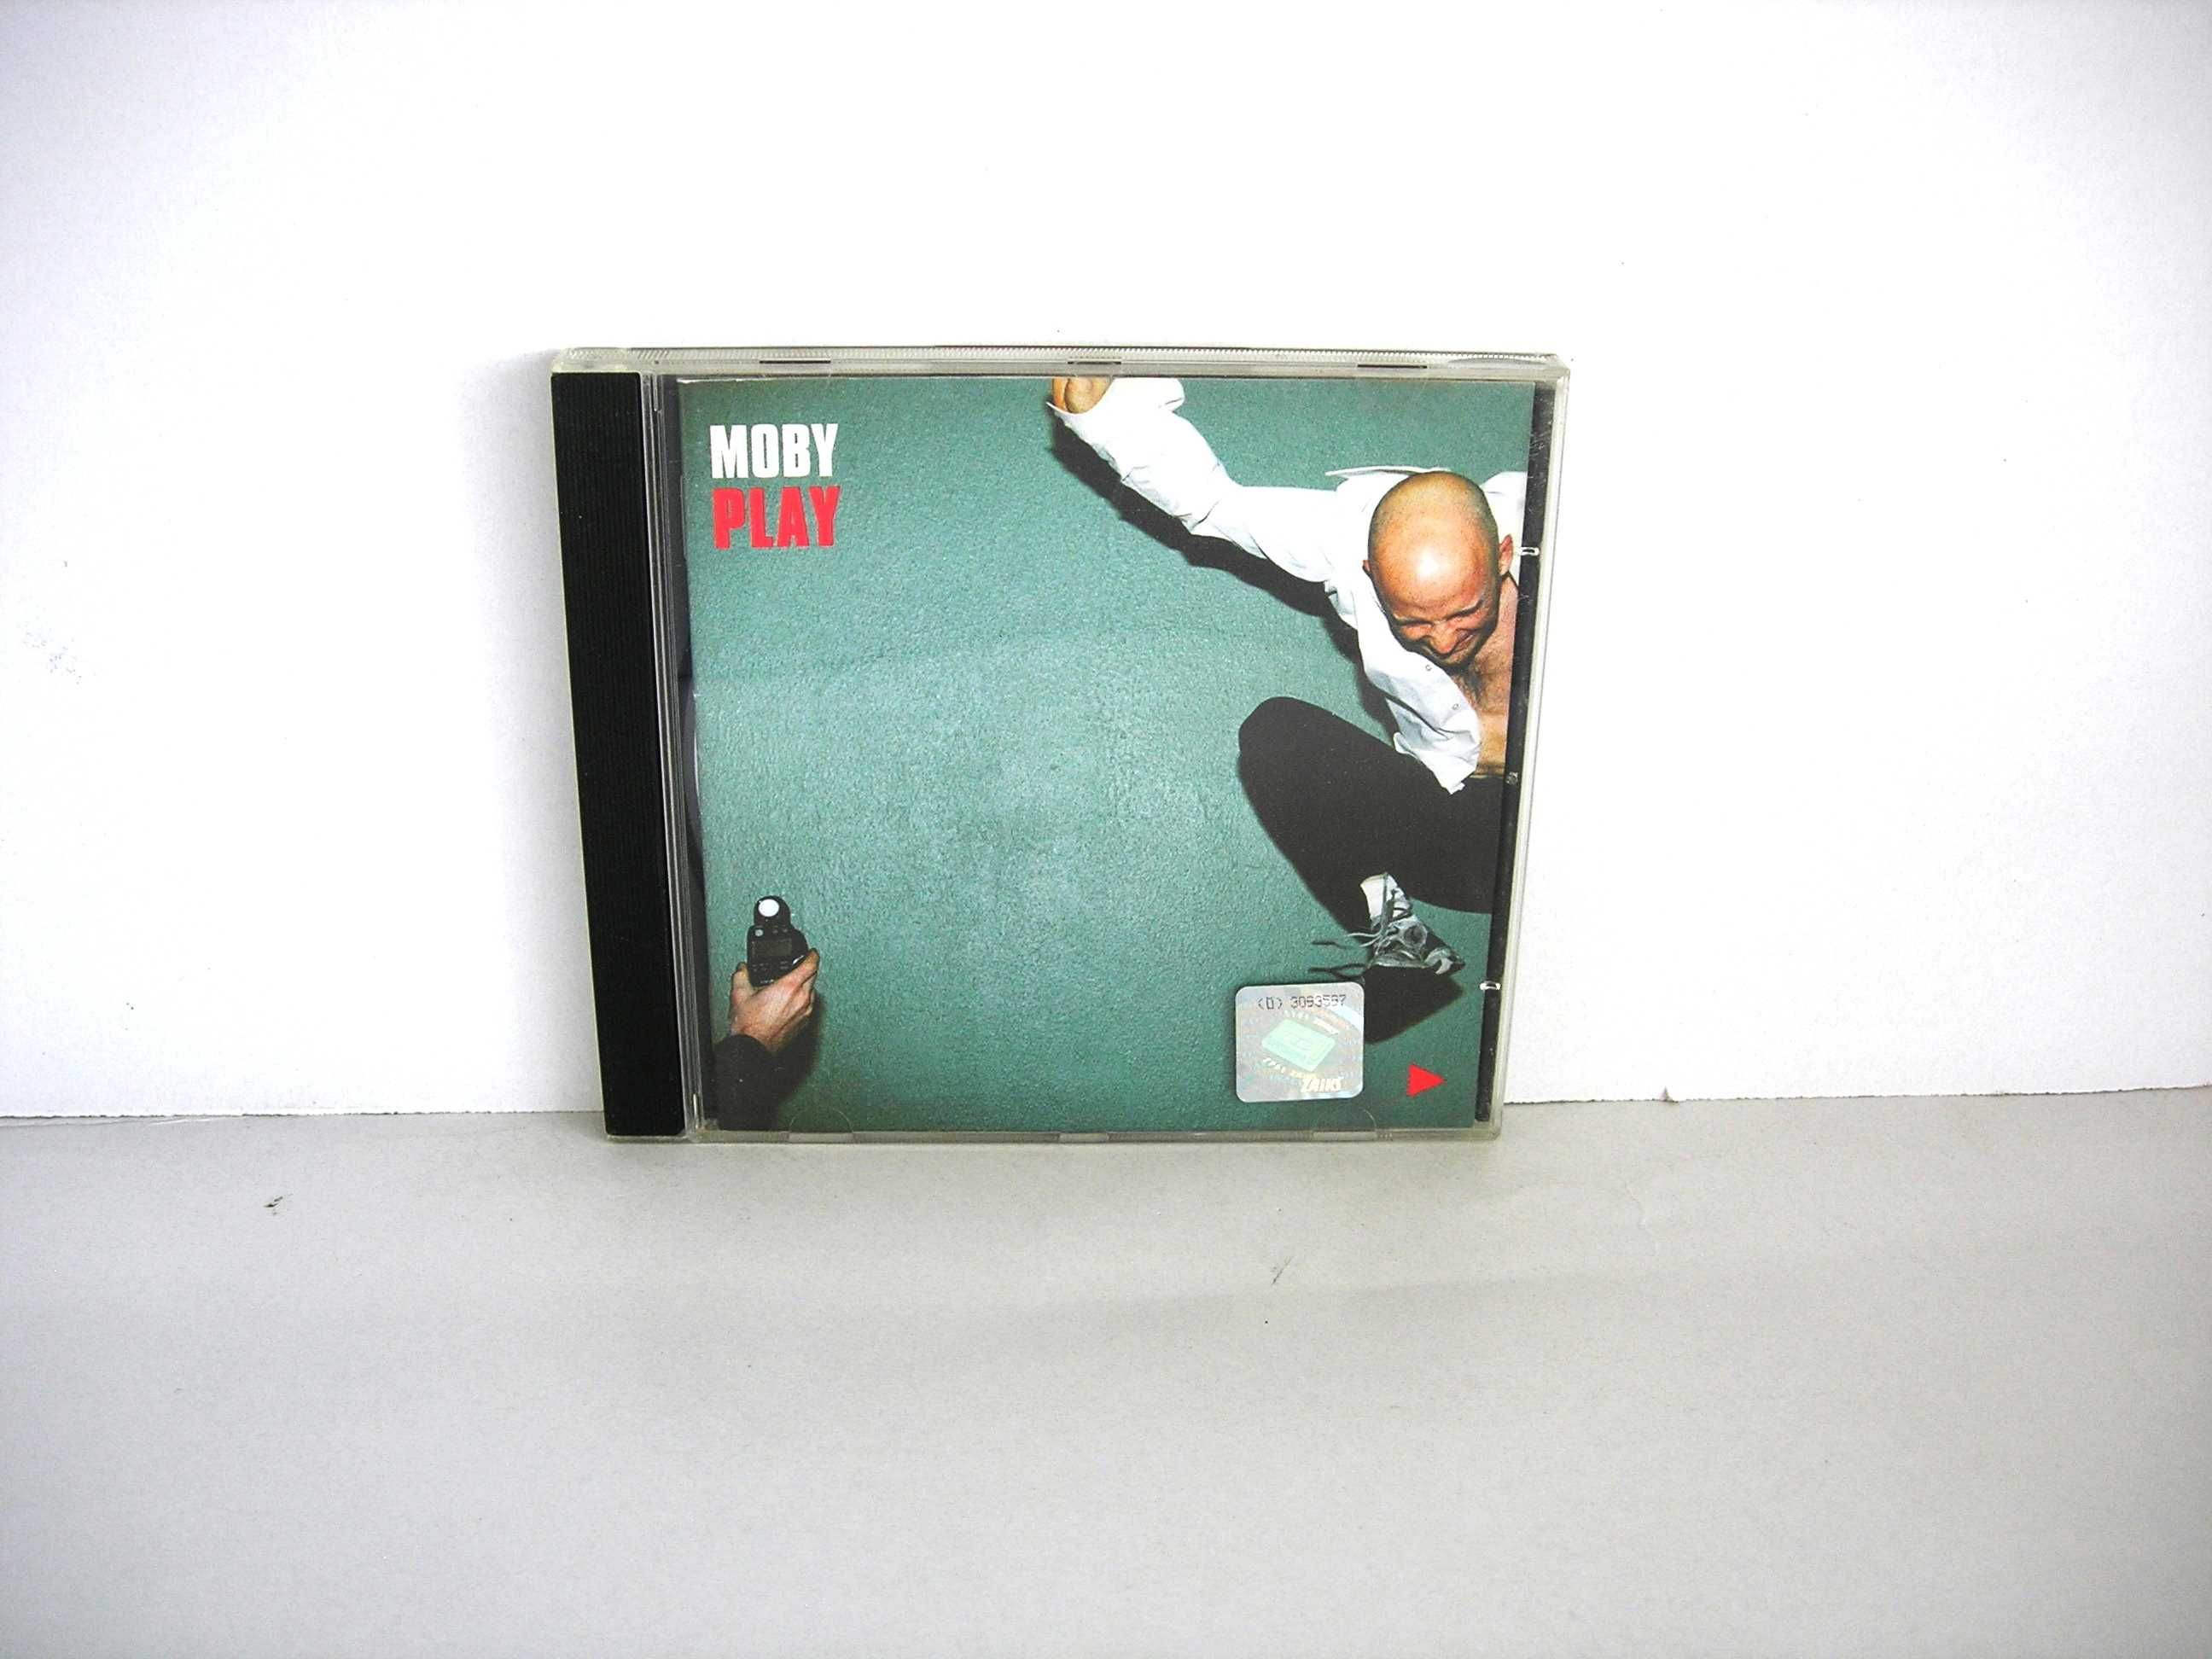 Moby "Play" CD Mute Records 1999 UK